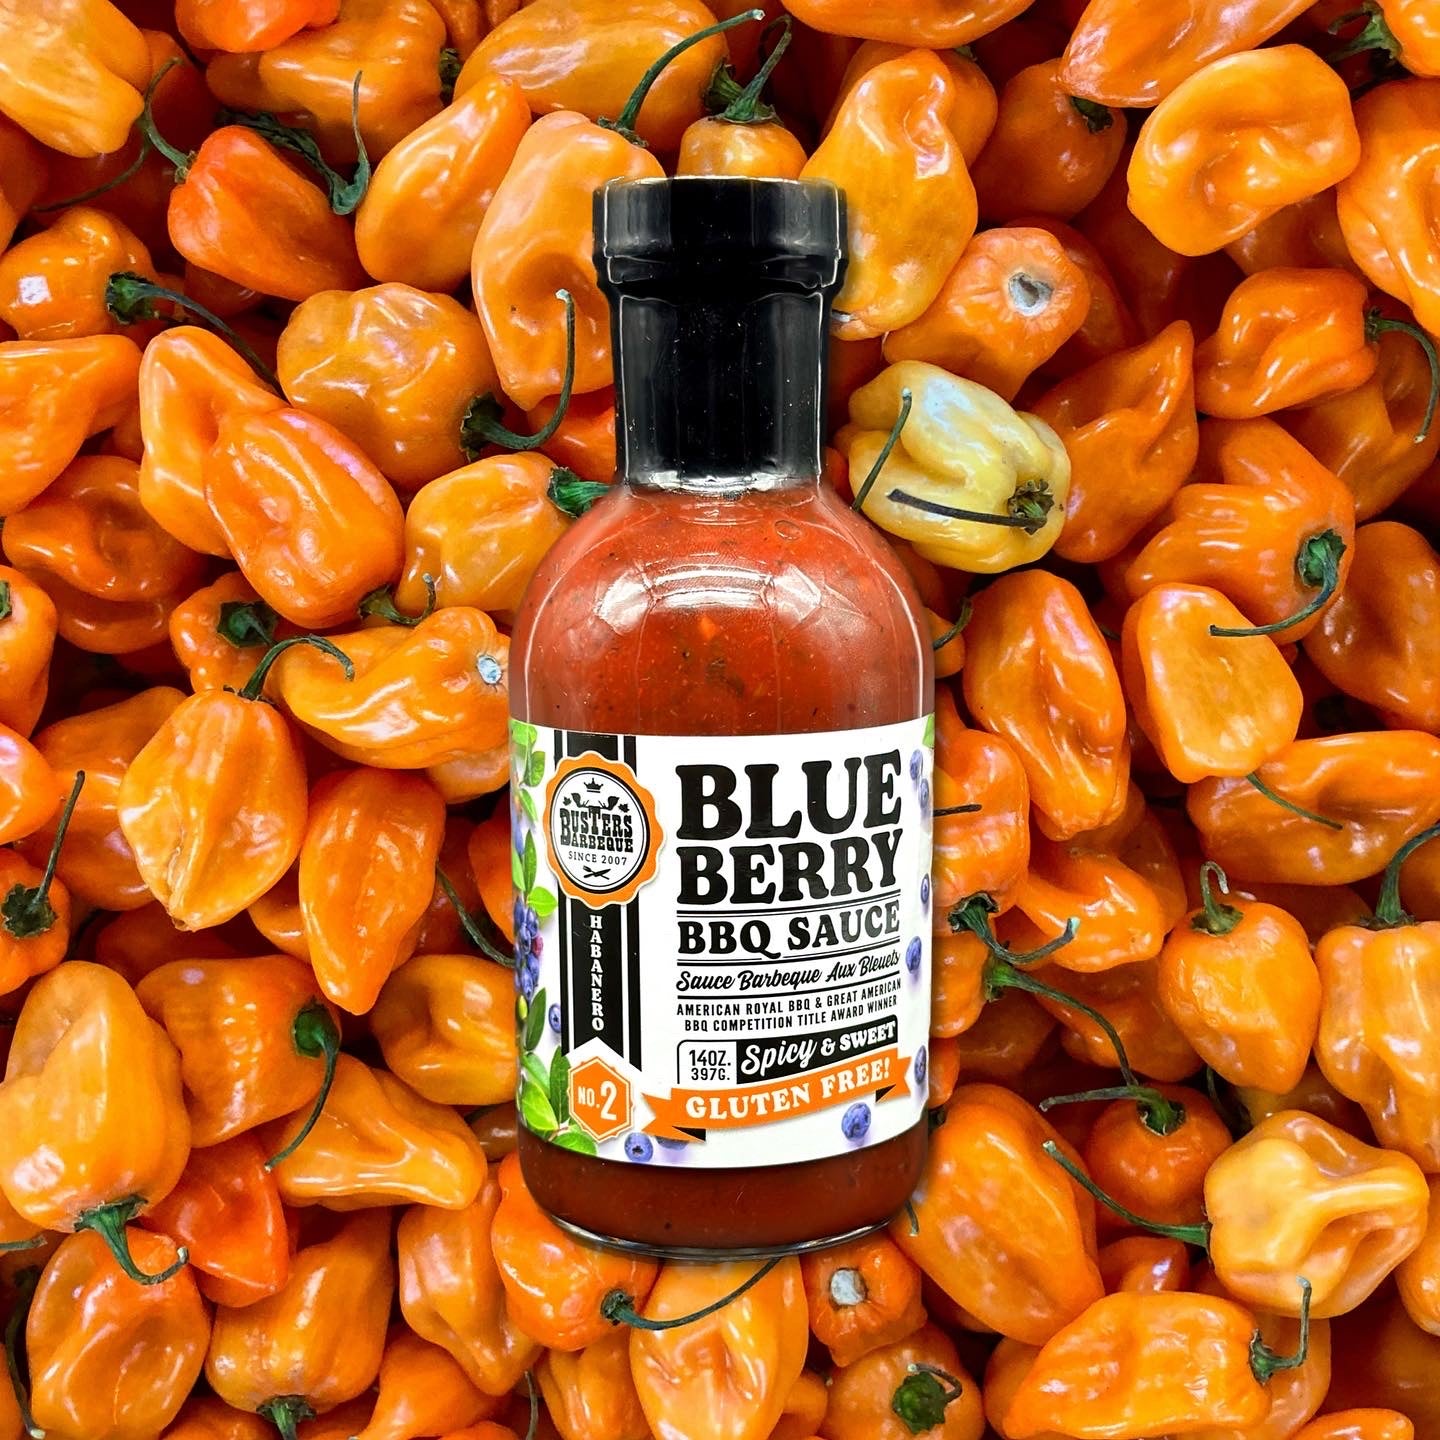 Busters Blueberry BBQ Sauce - Blueberry Habanero